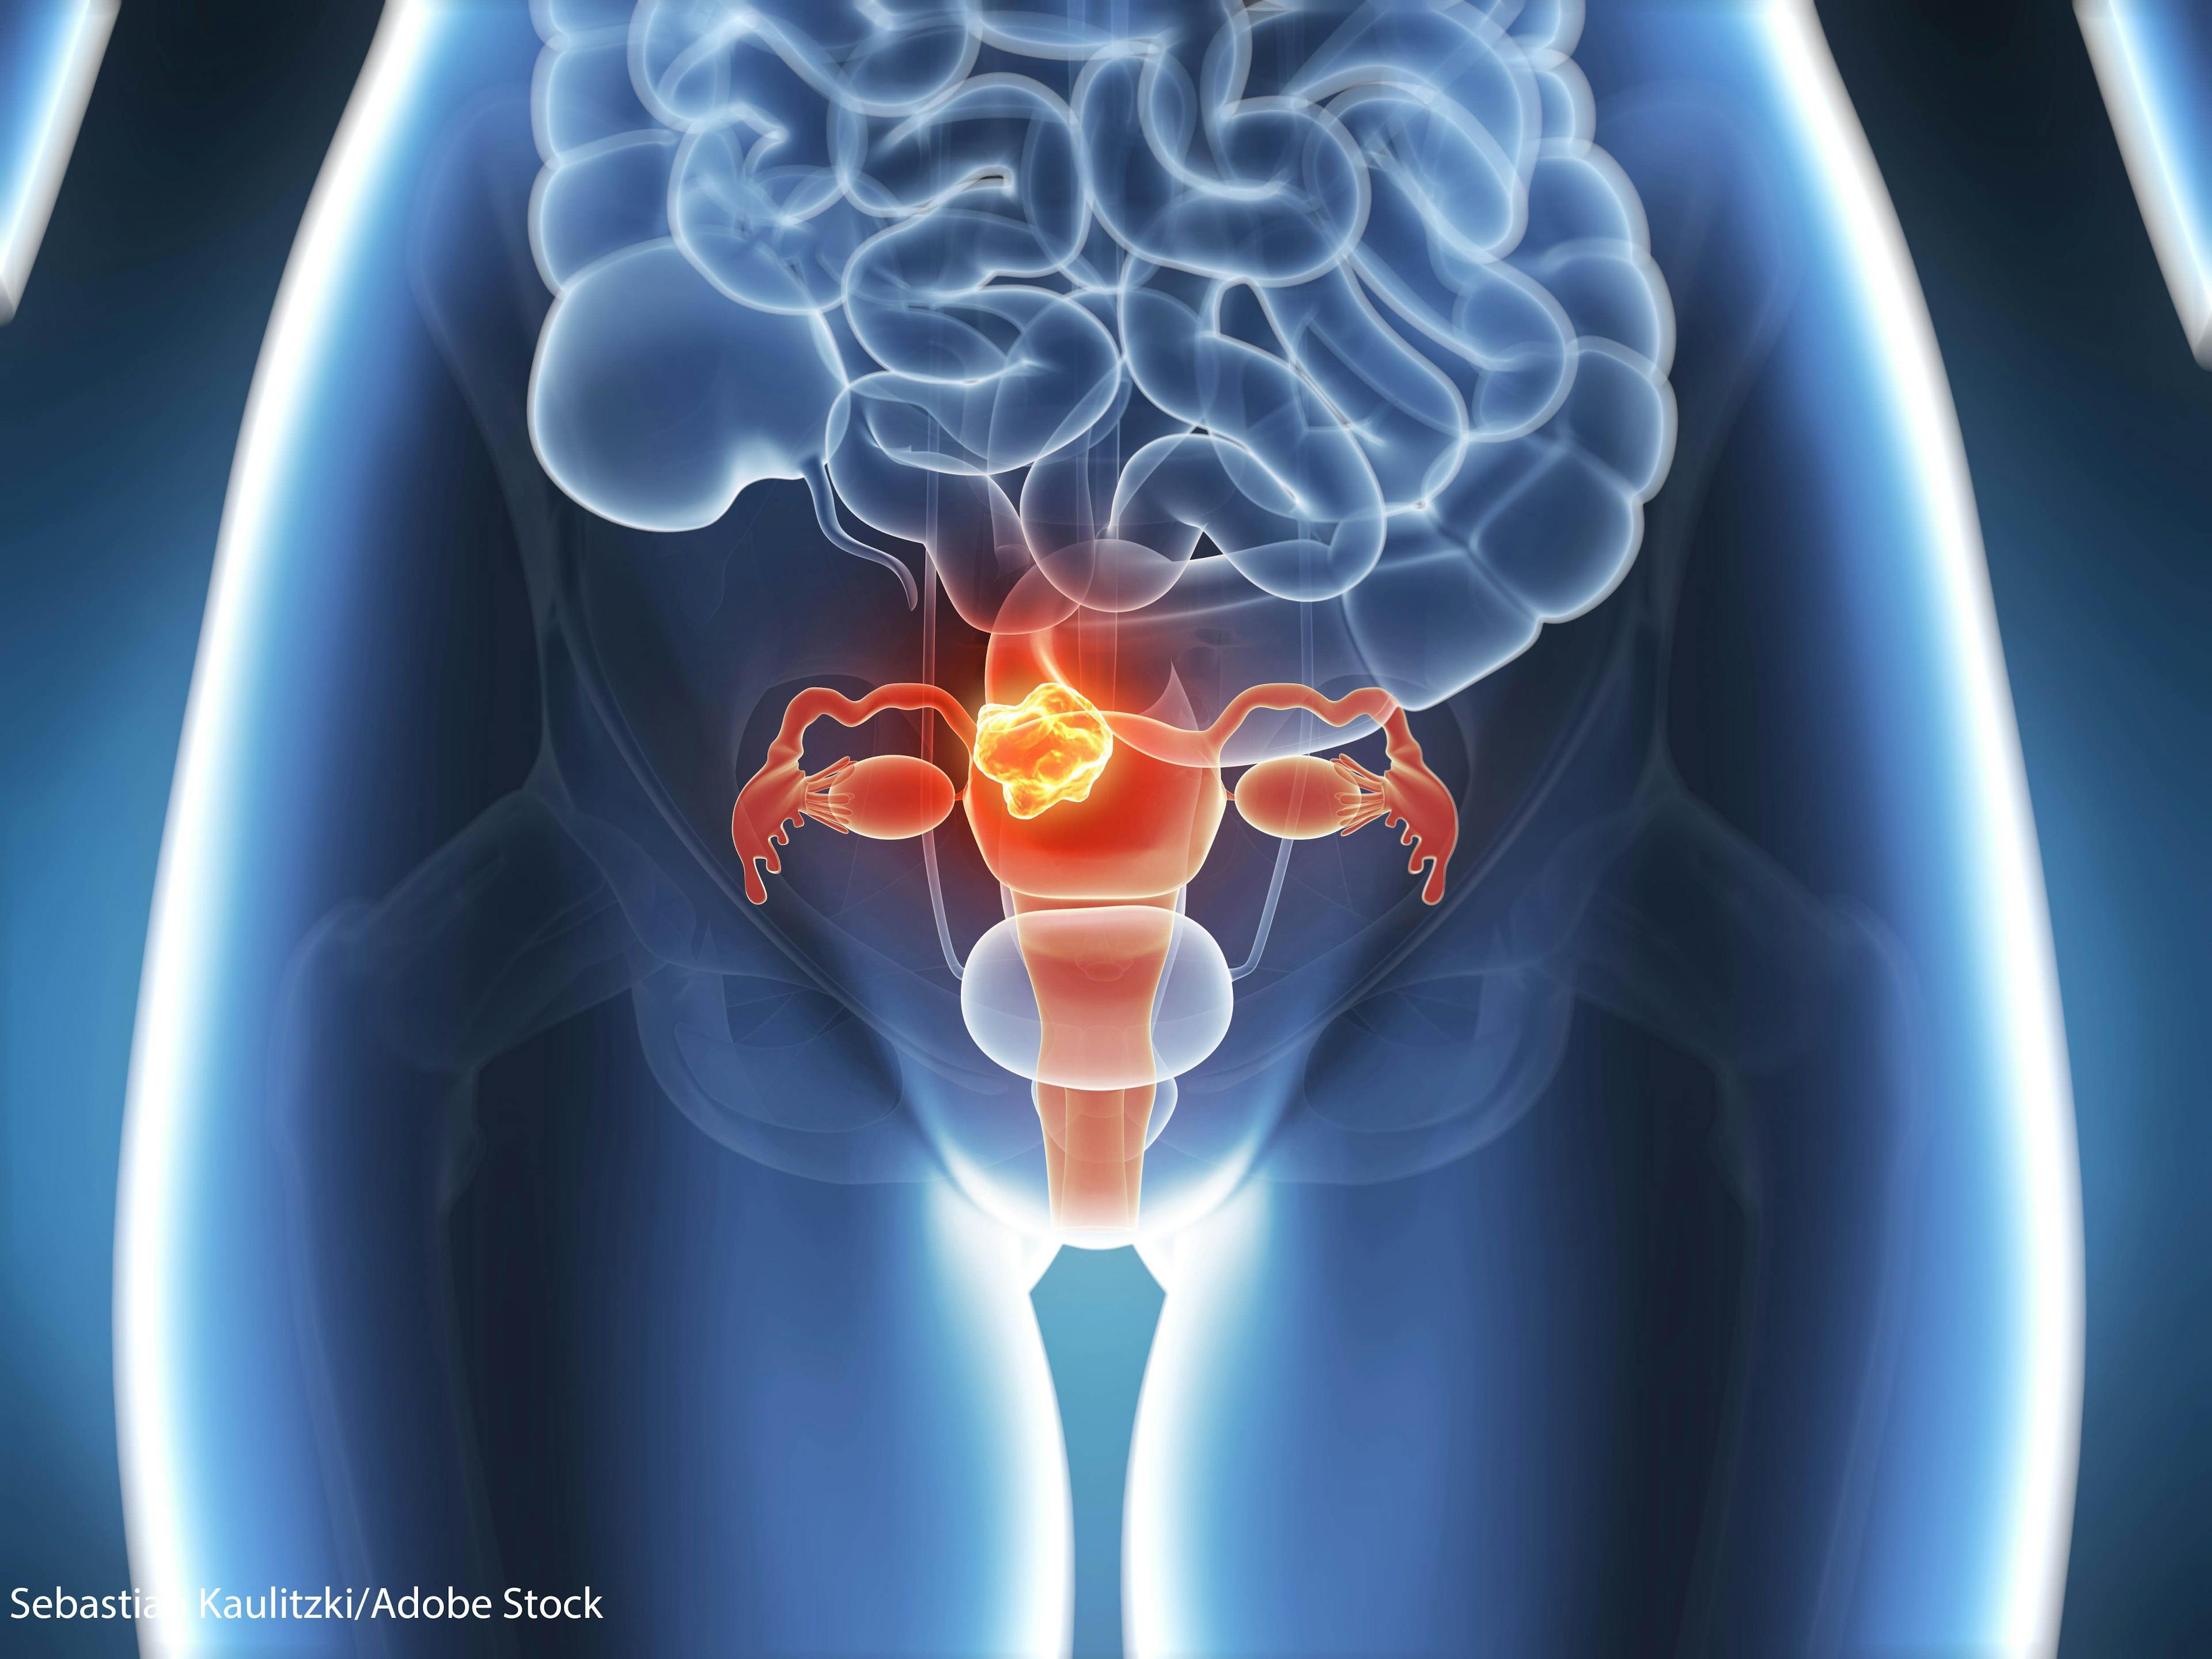 Is Precision Therapy an Option for Advanced Endometrial Carcinoma?